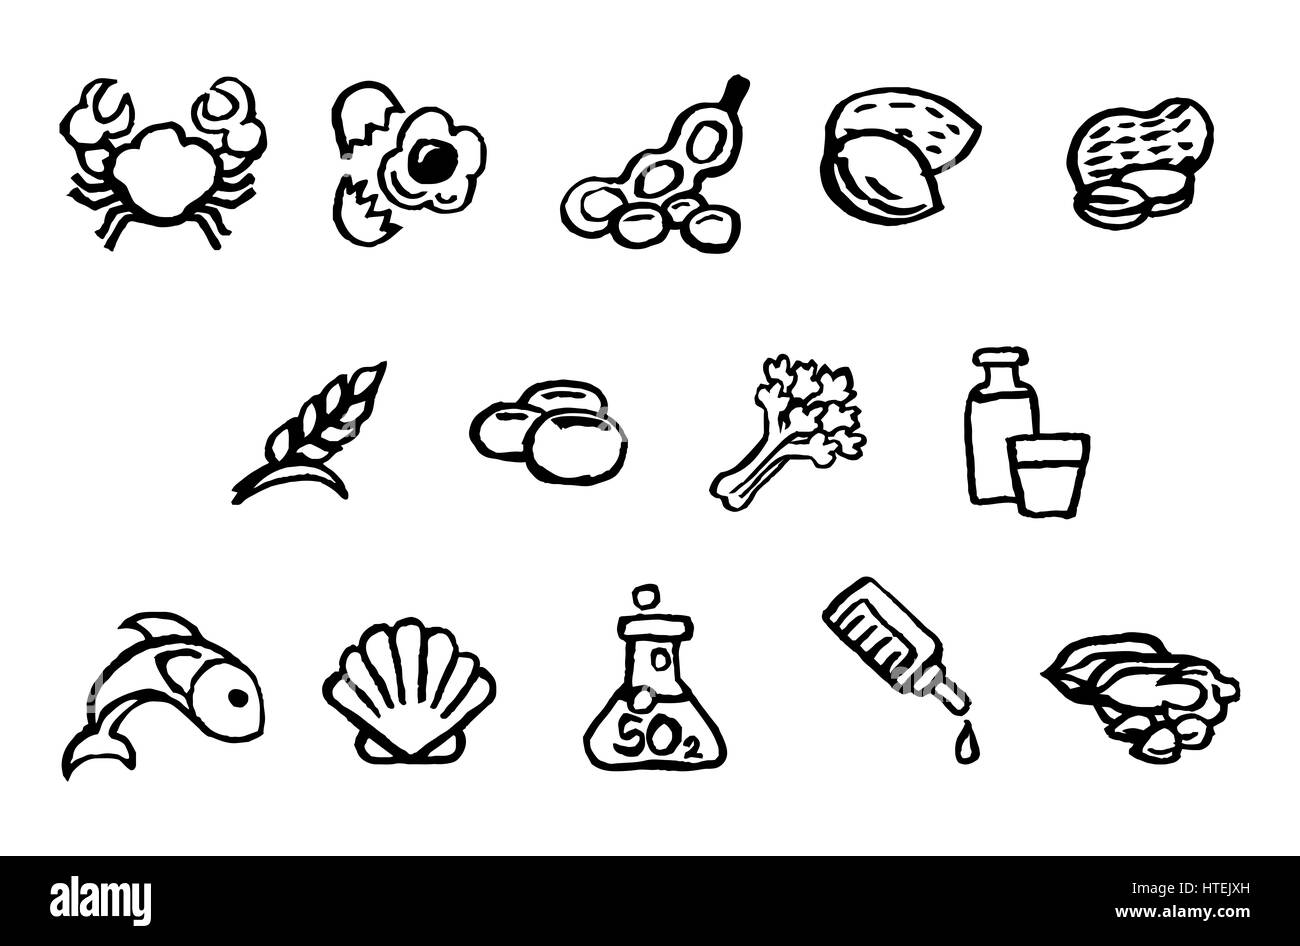 Set of food safety allergy icons including 14 allergies outlined by EU Food Information for Consumers Regulation EFSA European Food Safety Authority.  Stock Photo